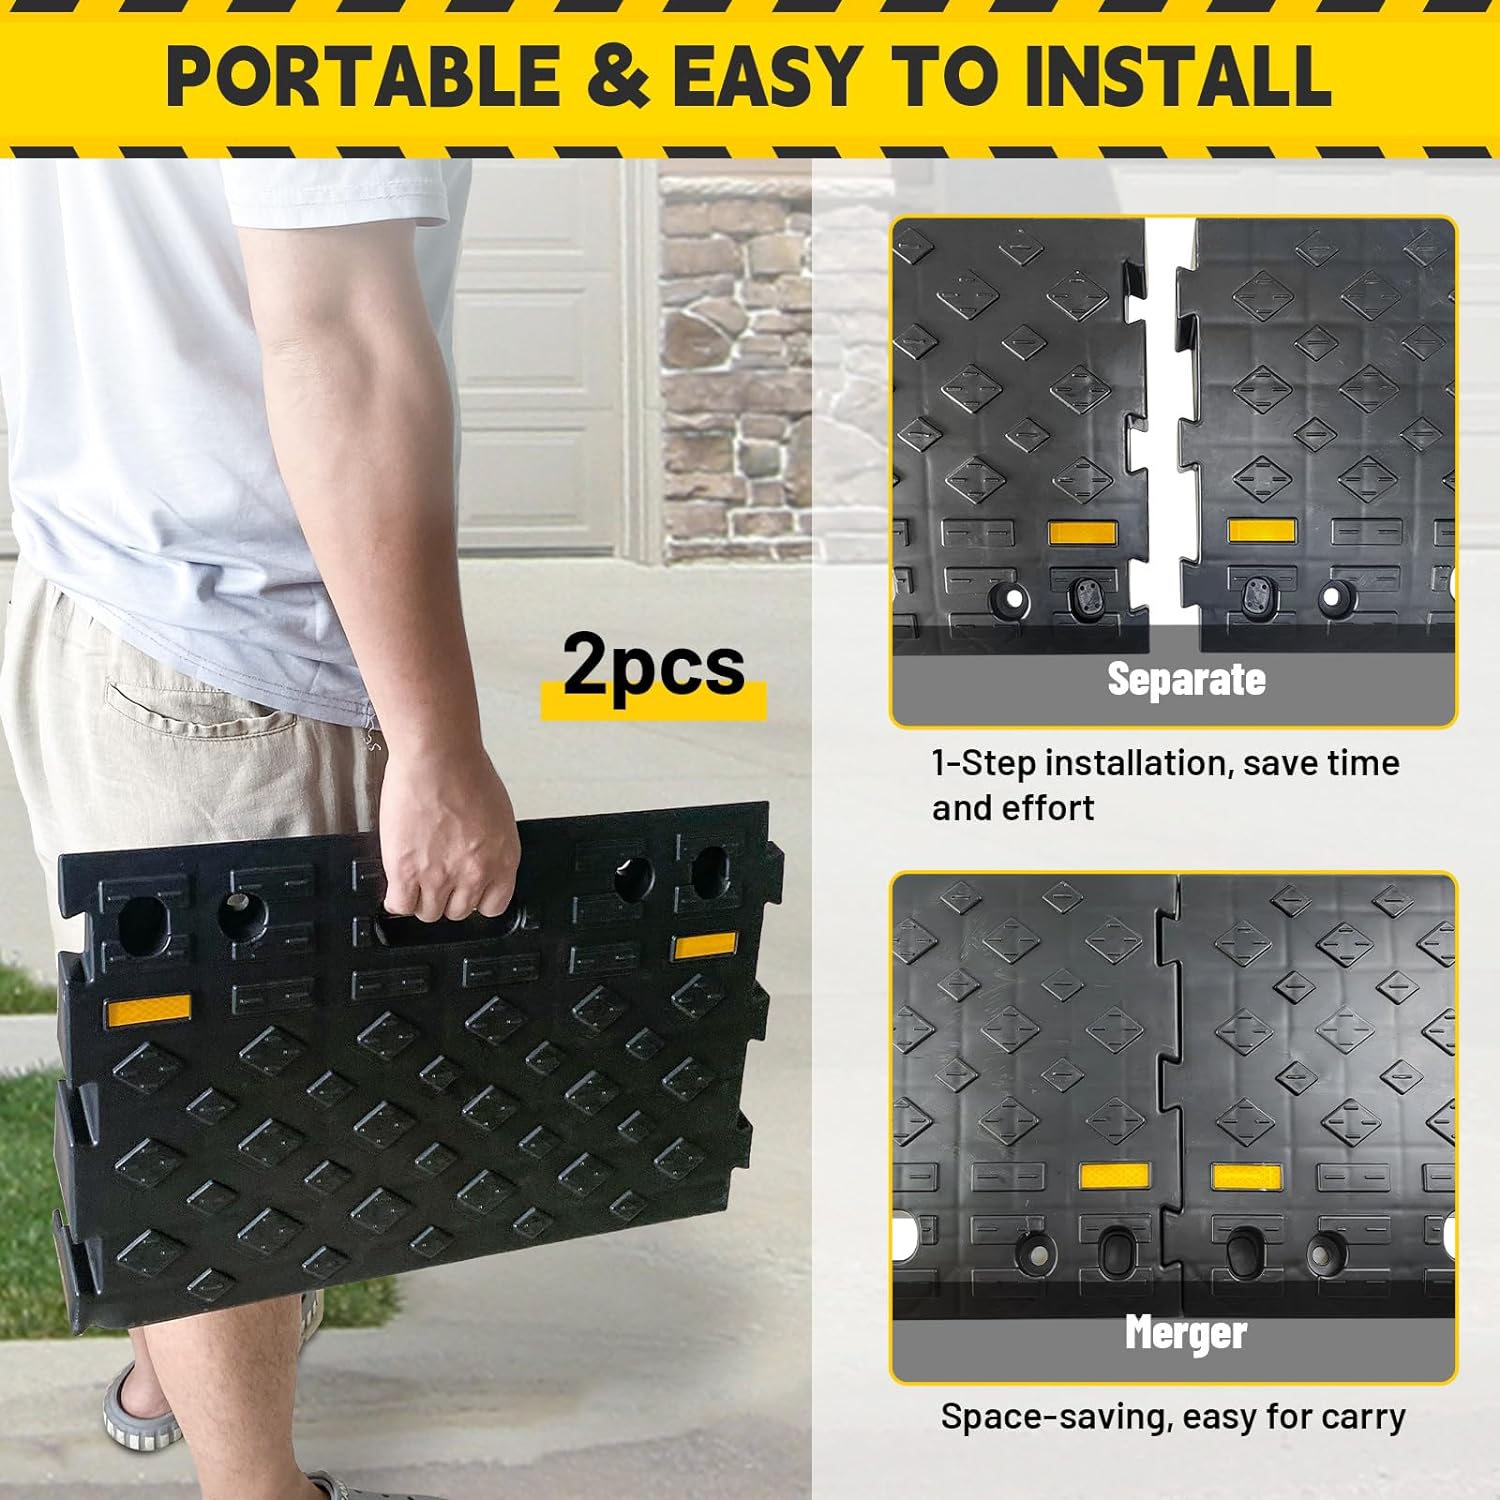 Dual-use portable ramp set for seamless entry in driveways and loading docks 20″L x 12.5″W x 4″H & 5"H connectable poly ramps